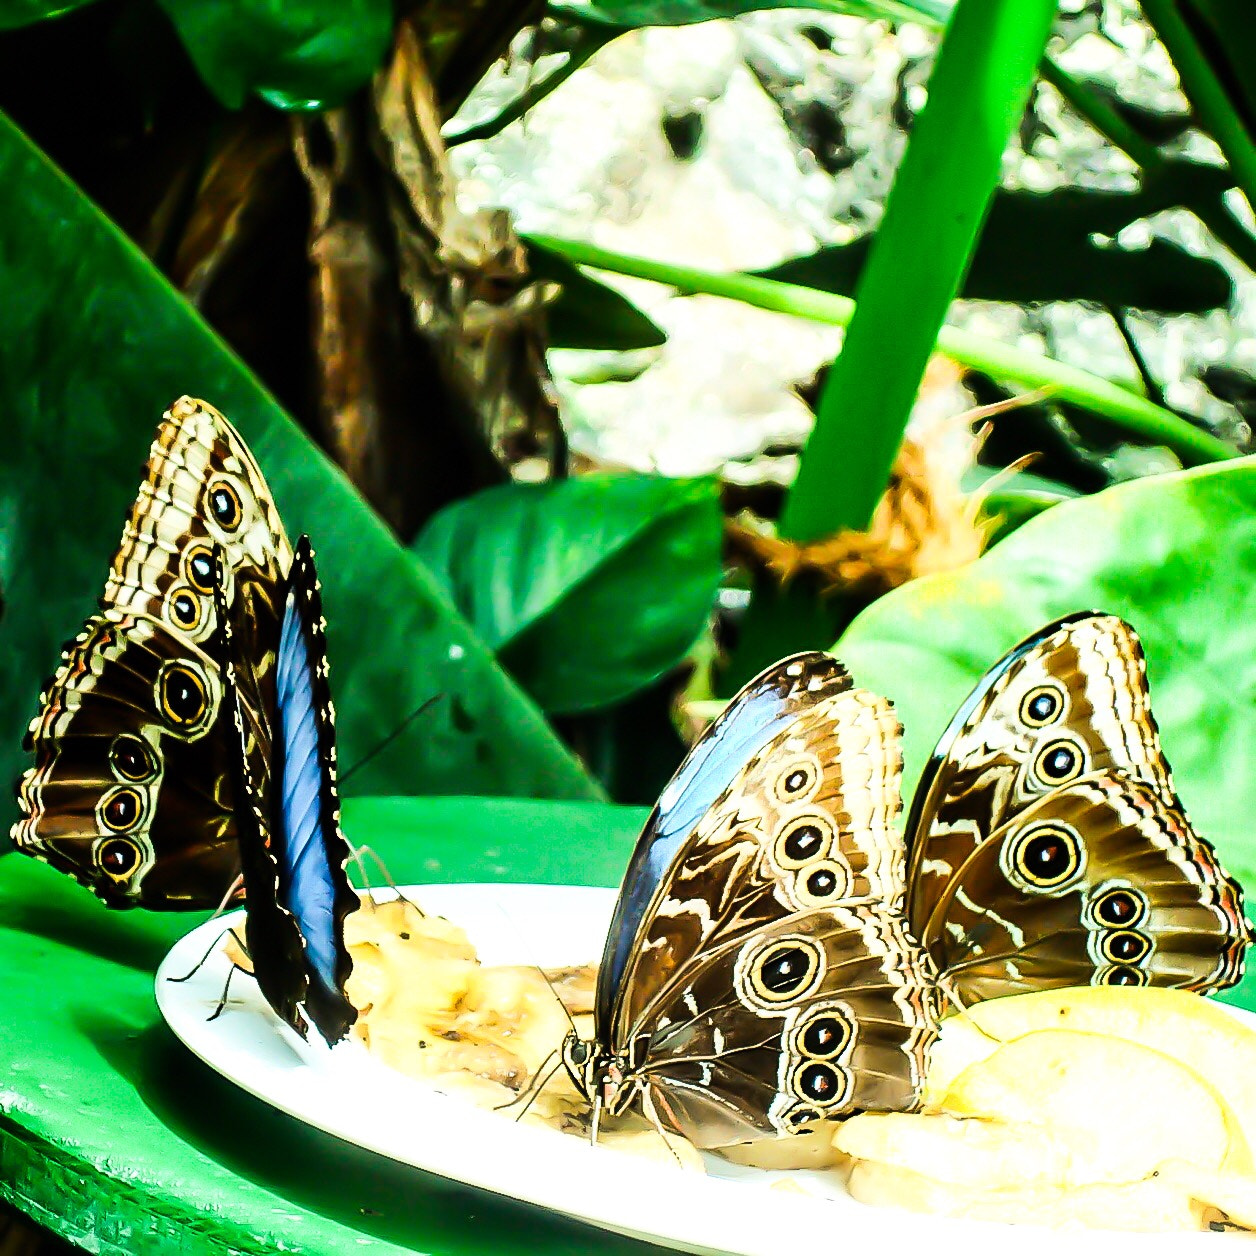 Sony DSC-W85 sample photo. Butterfly family eating bananas at breakfast time photography